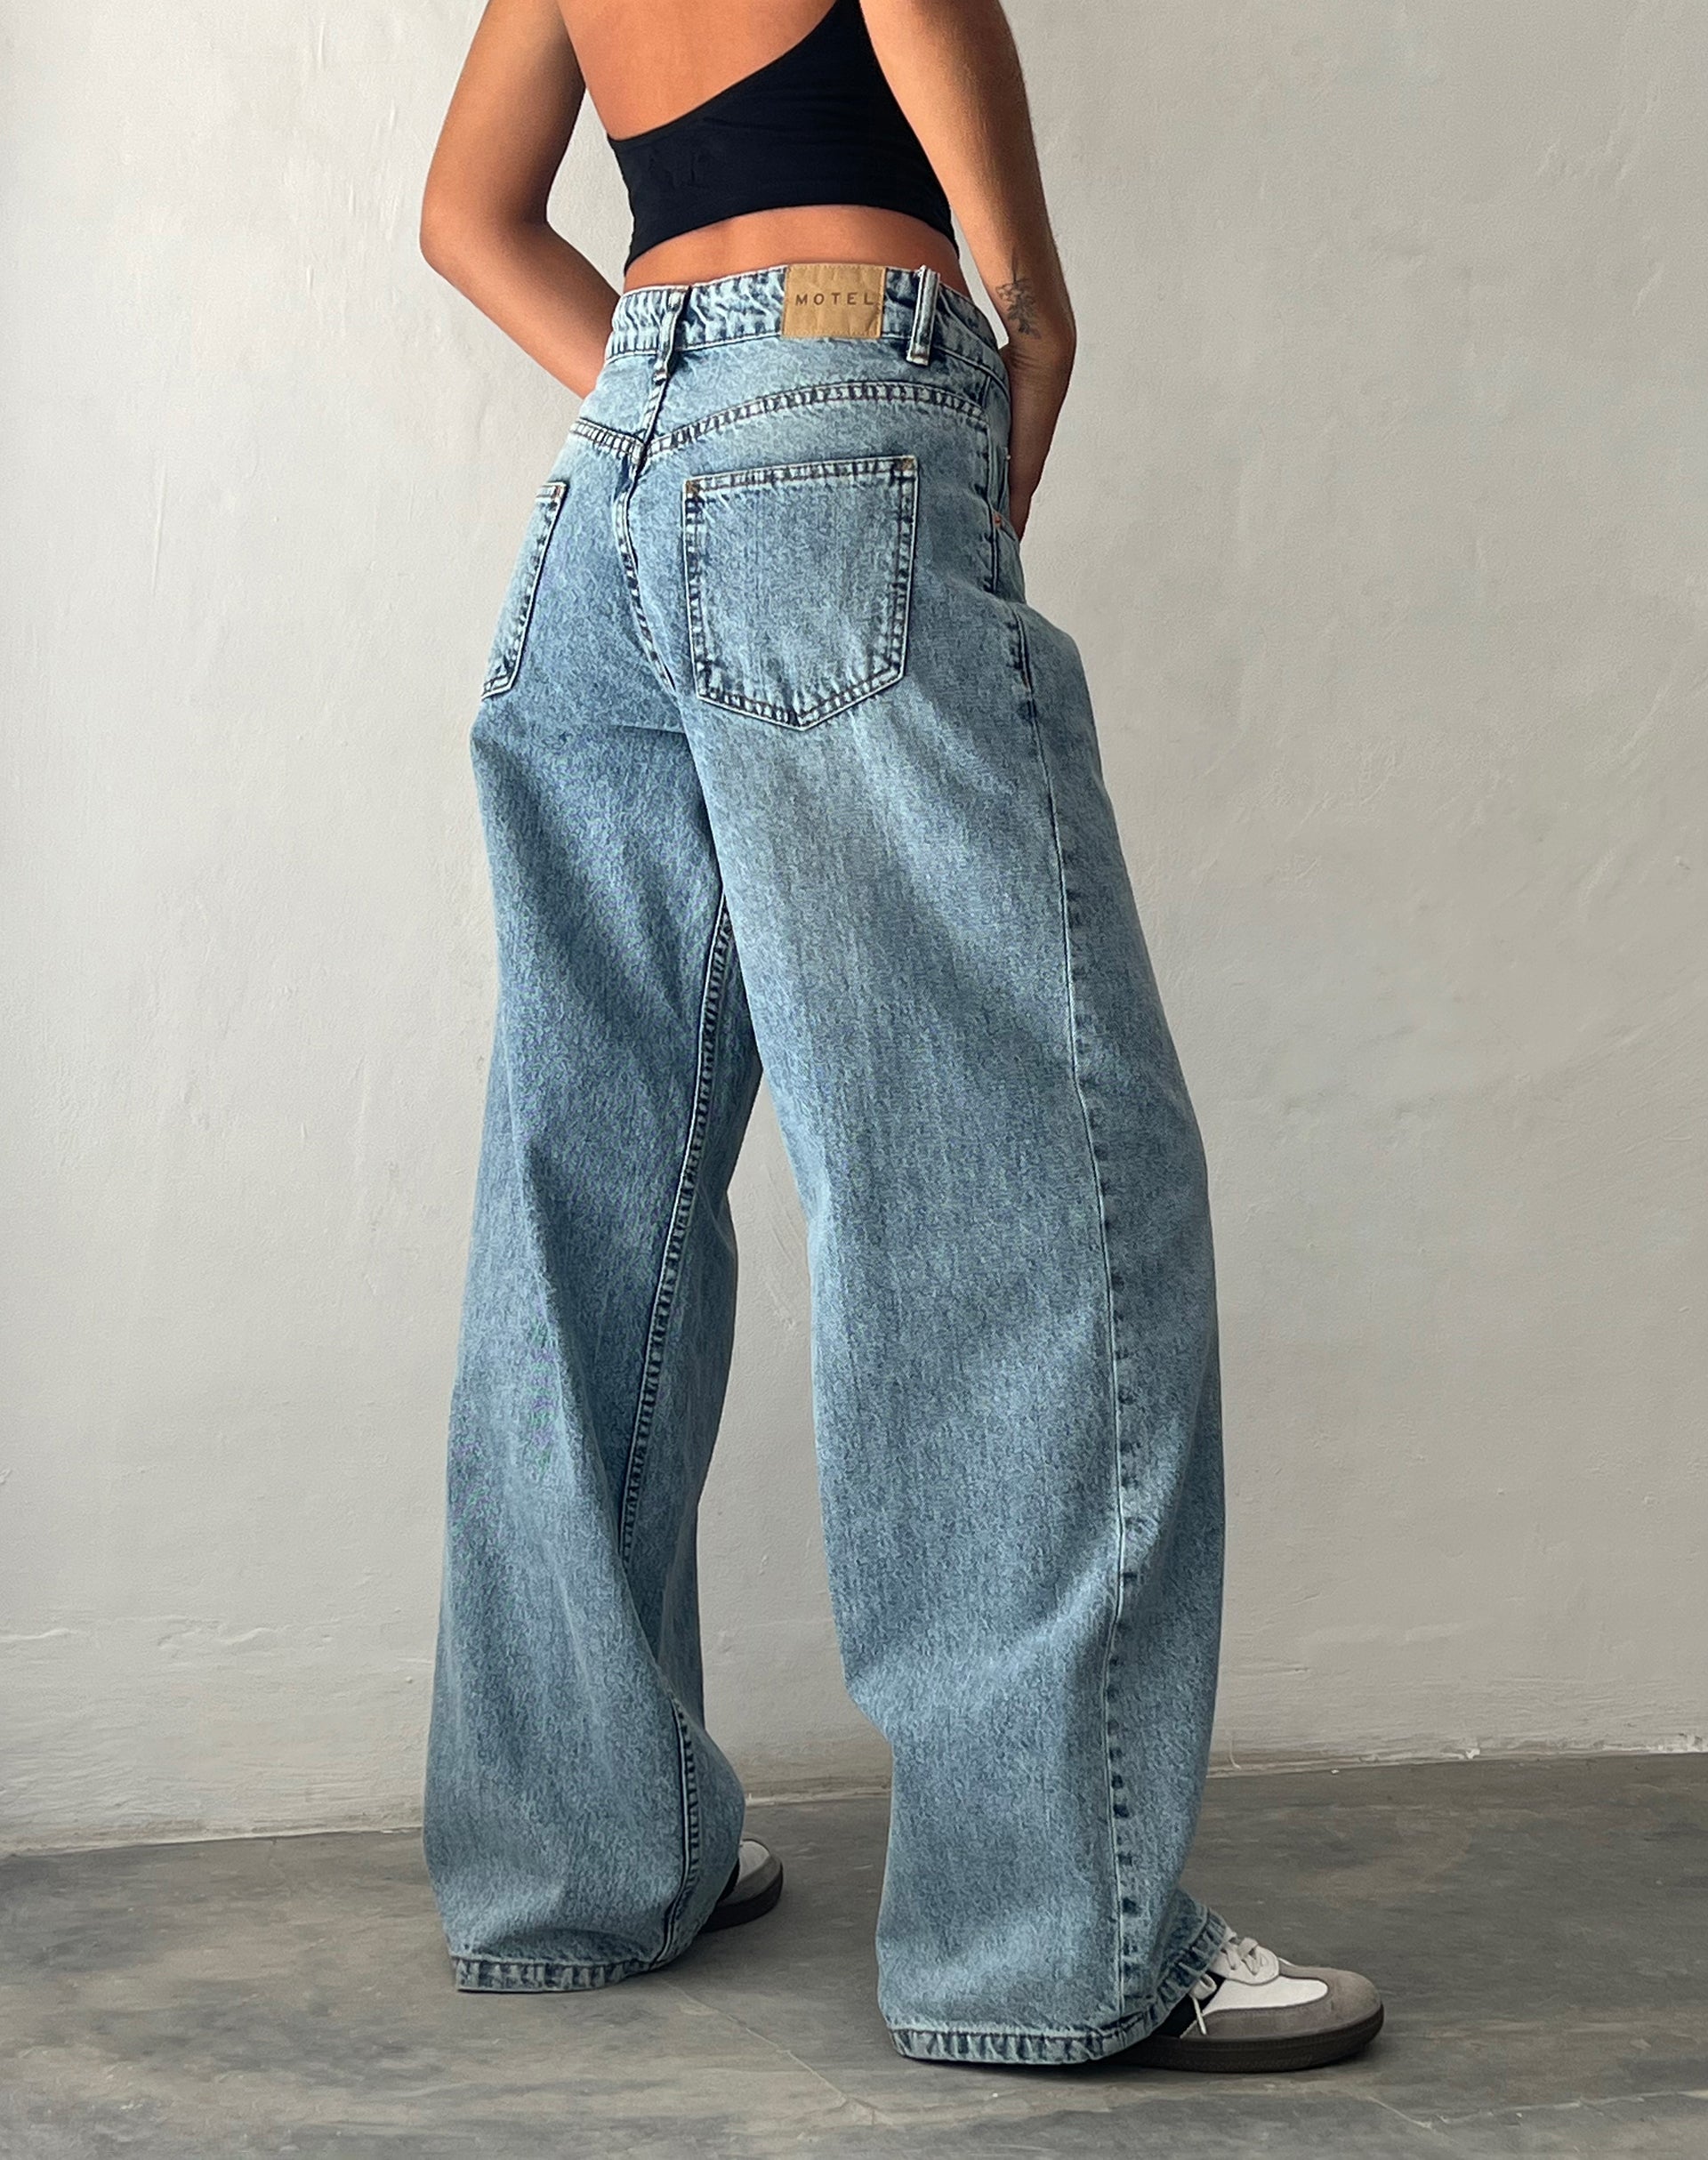 Motel roomy extra wide low rise jeans in mid blue used